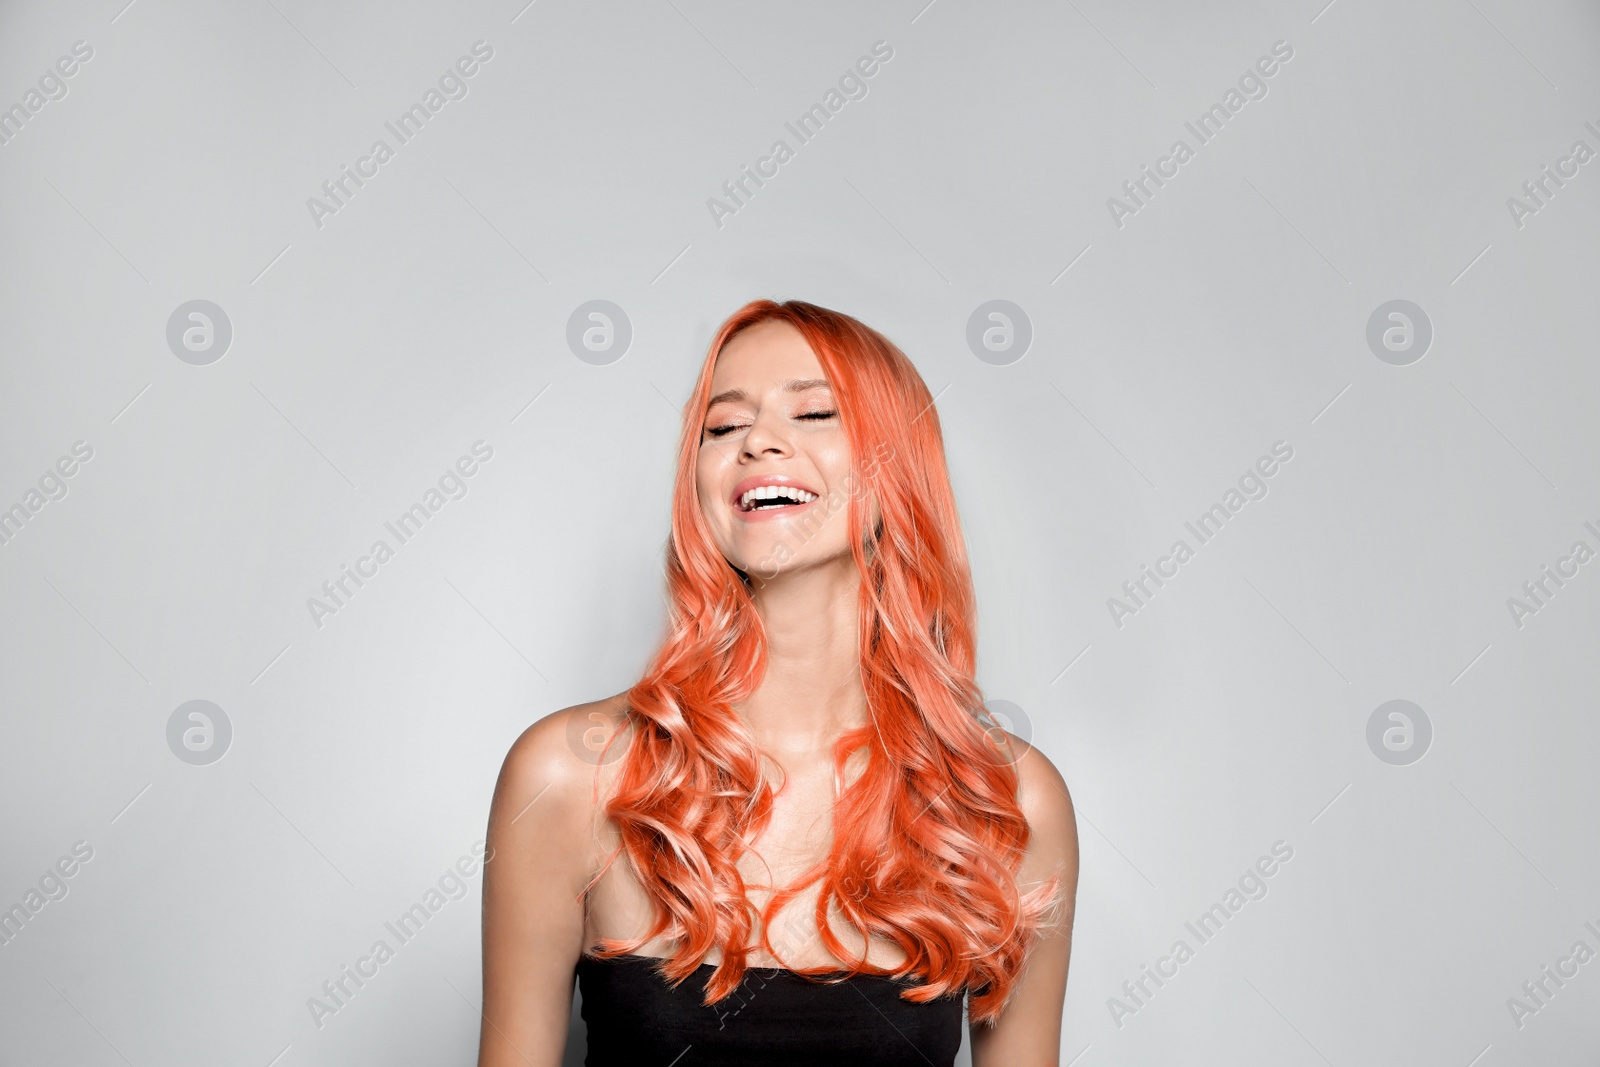 Image of Beautiful woman with long orange hair on light background